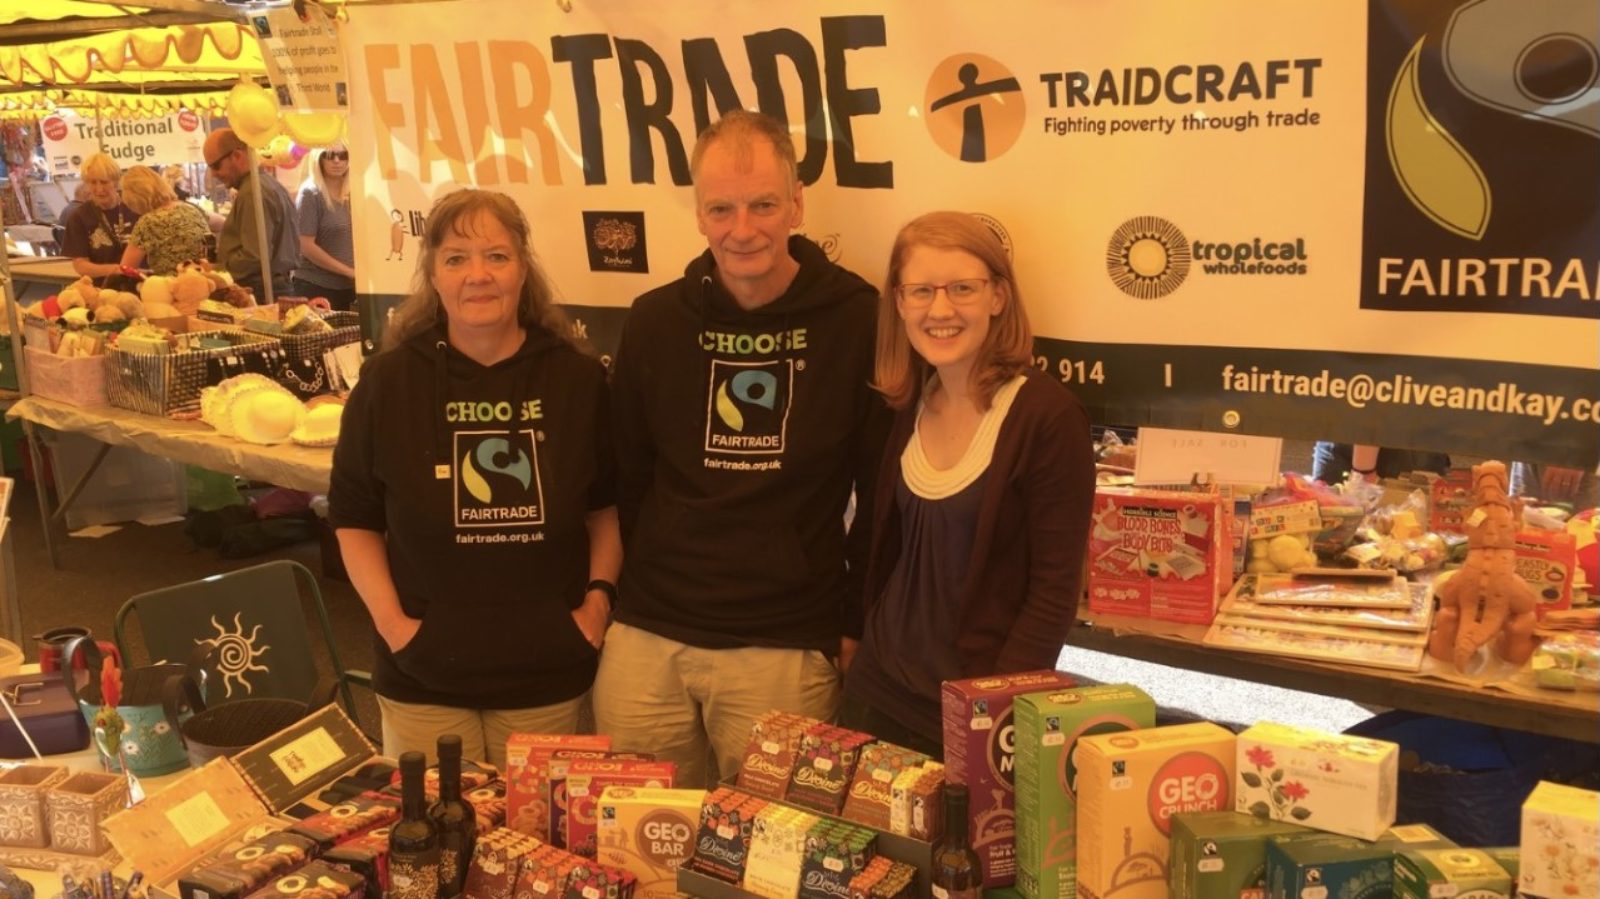 Kay with husband Clive and myself running a Fairtrade stall